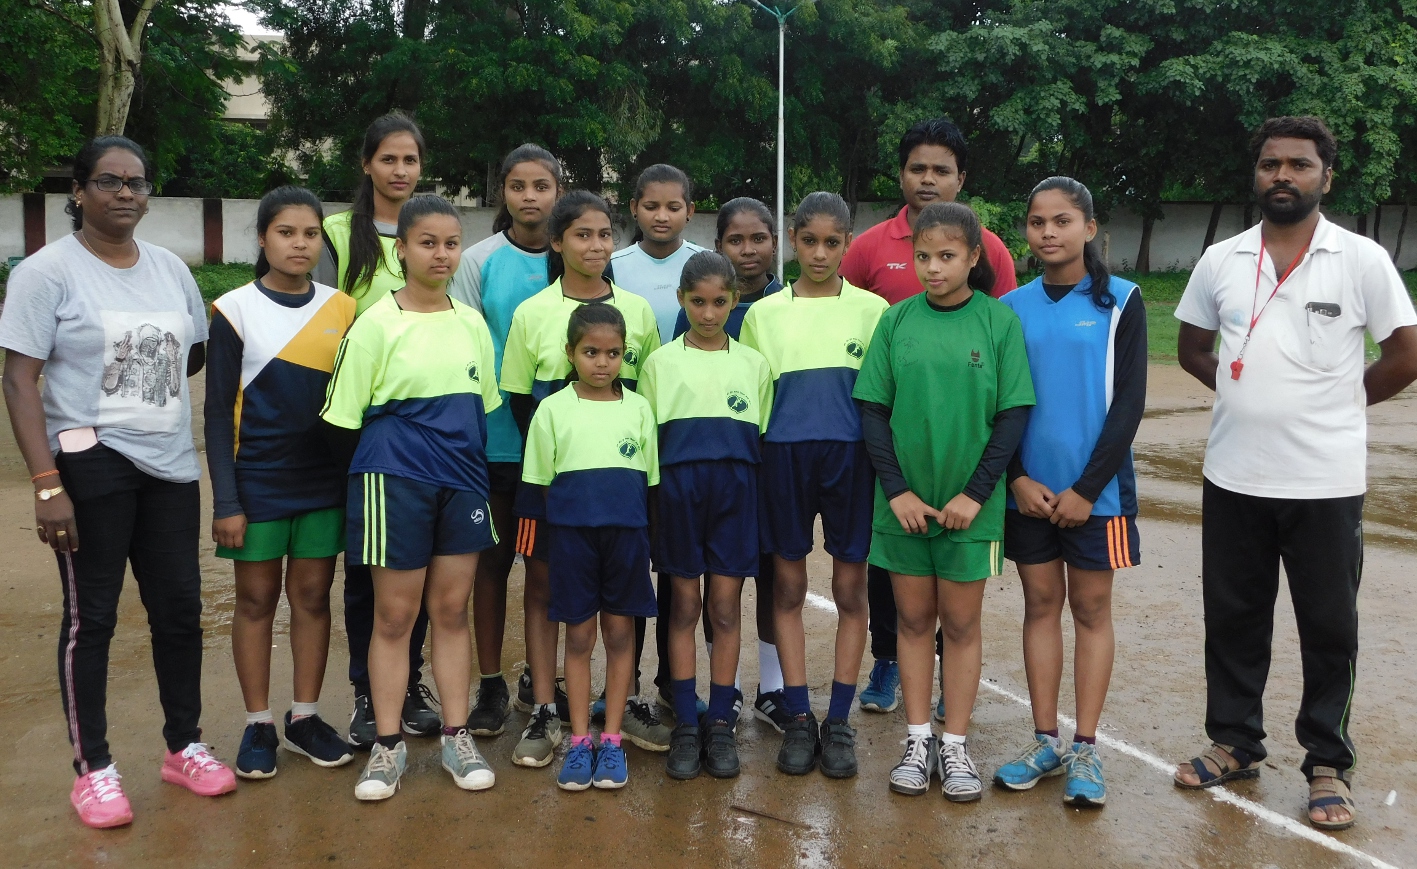 Handball players selected for state level without playing